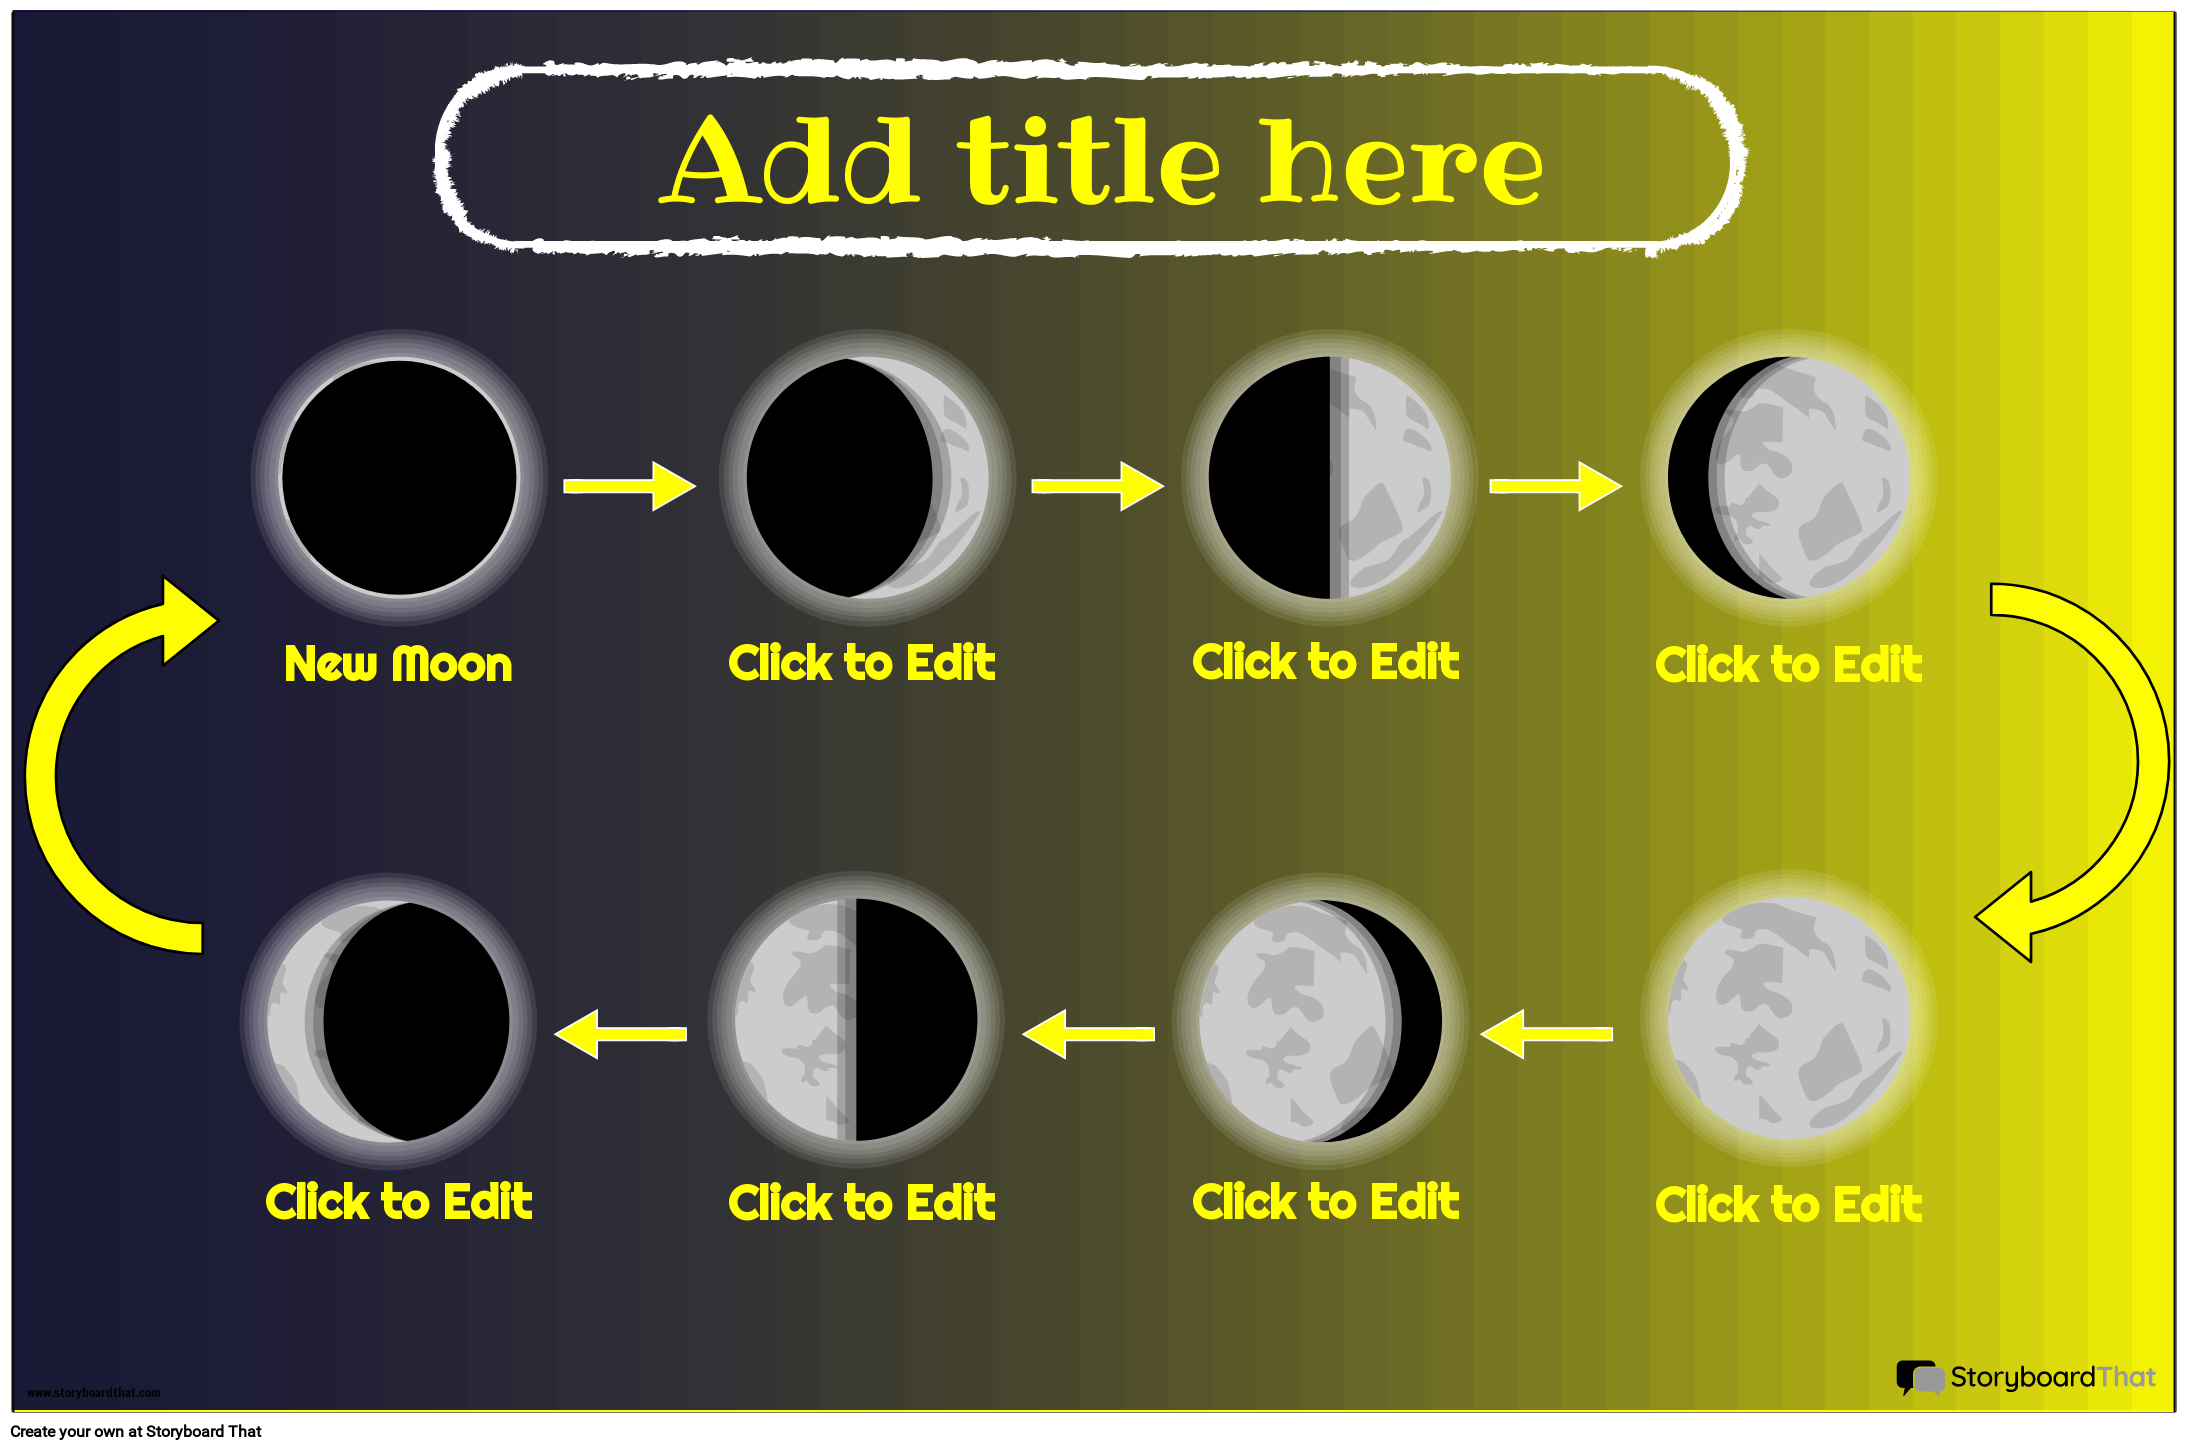 Phases of the Moon Poster